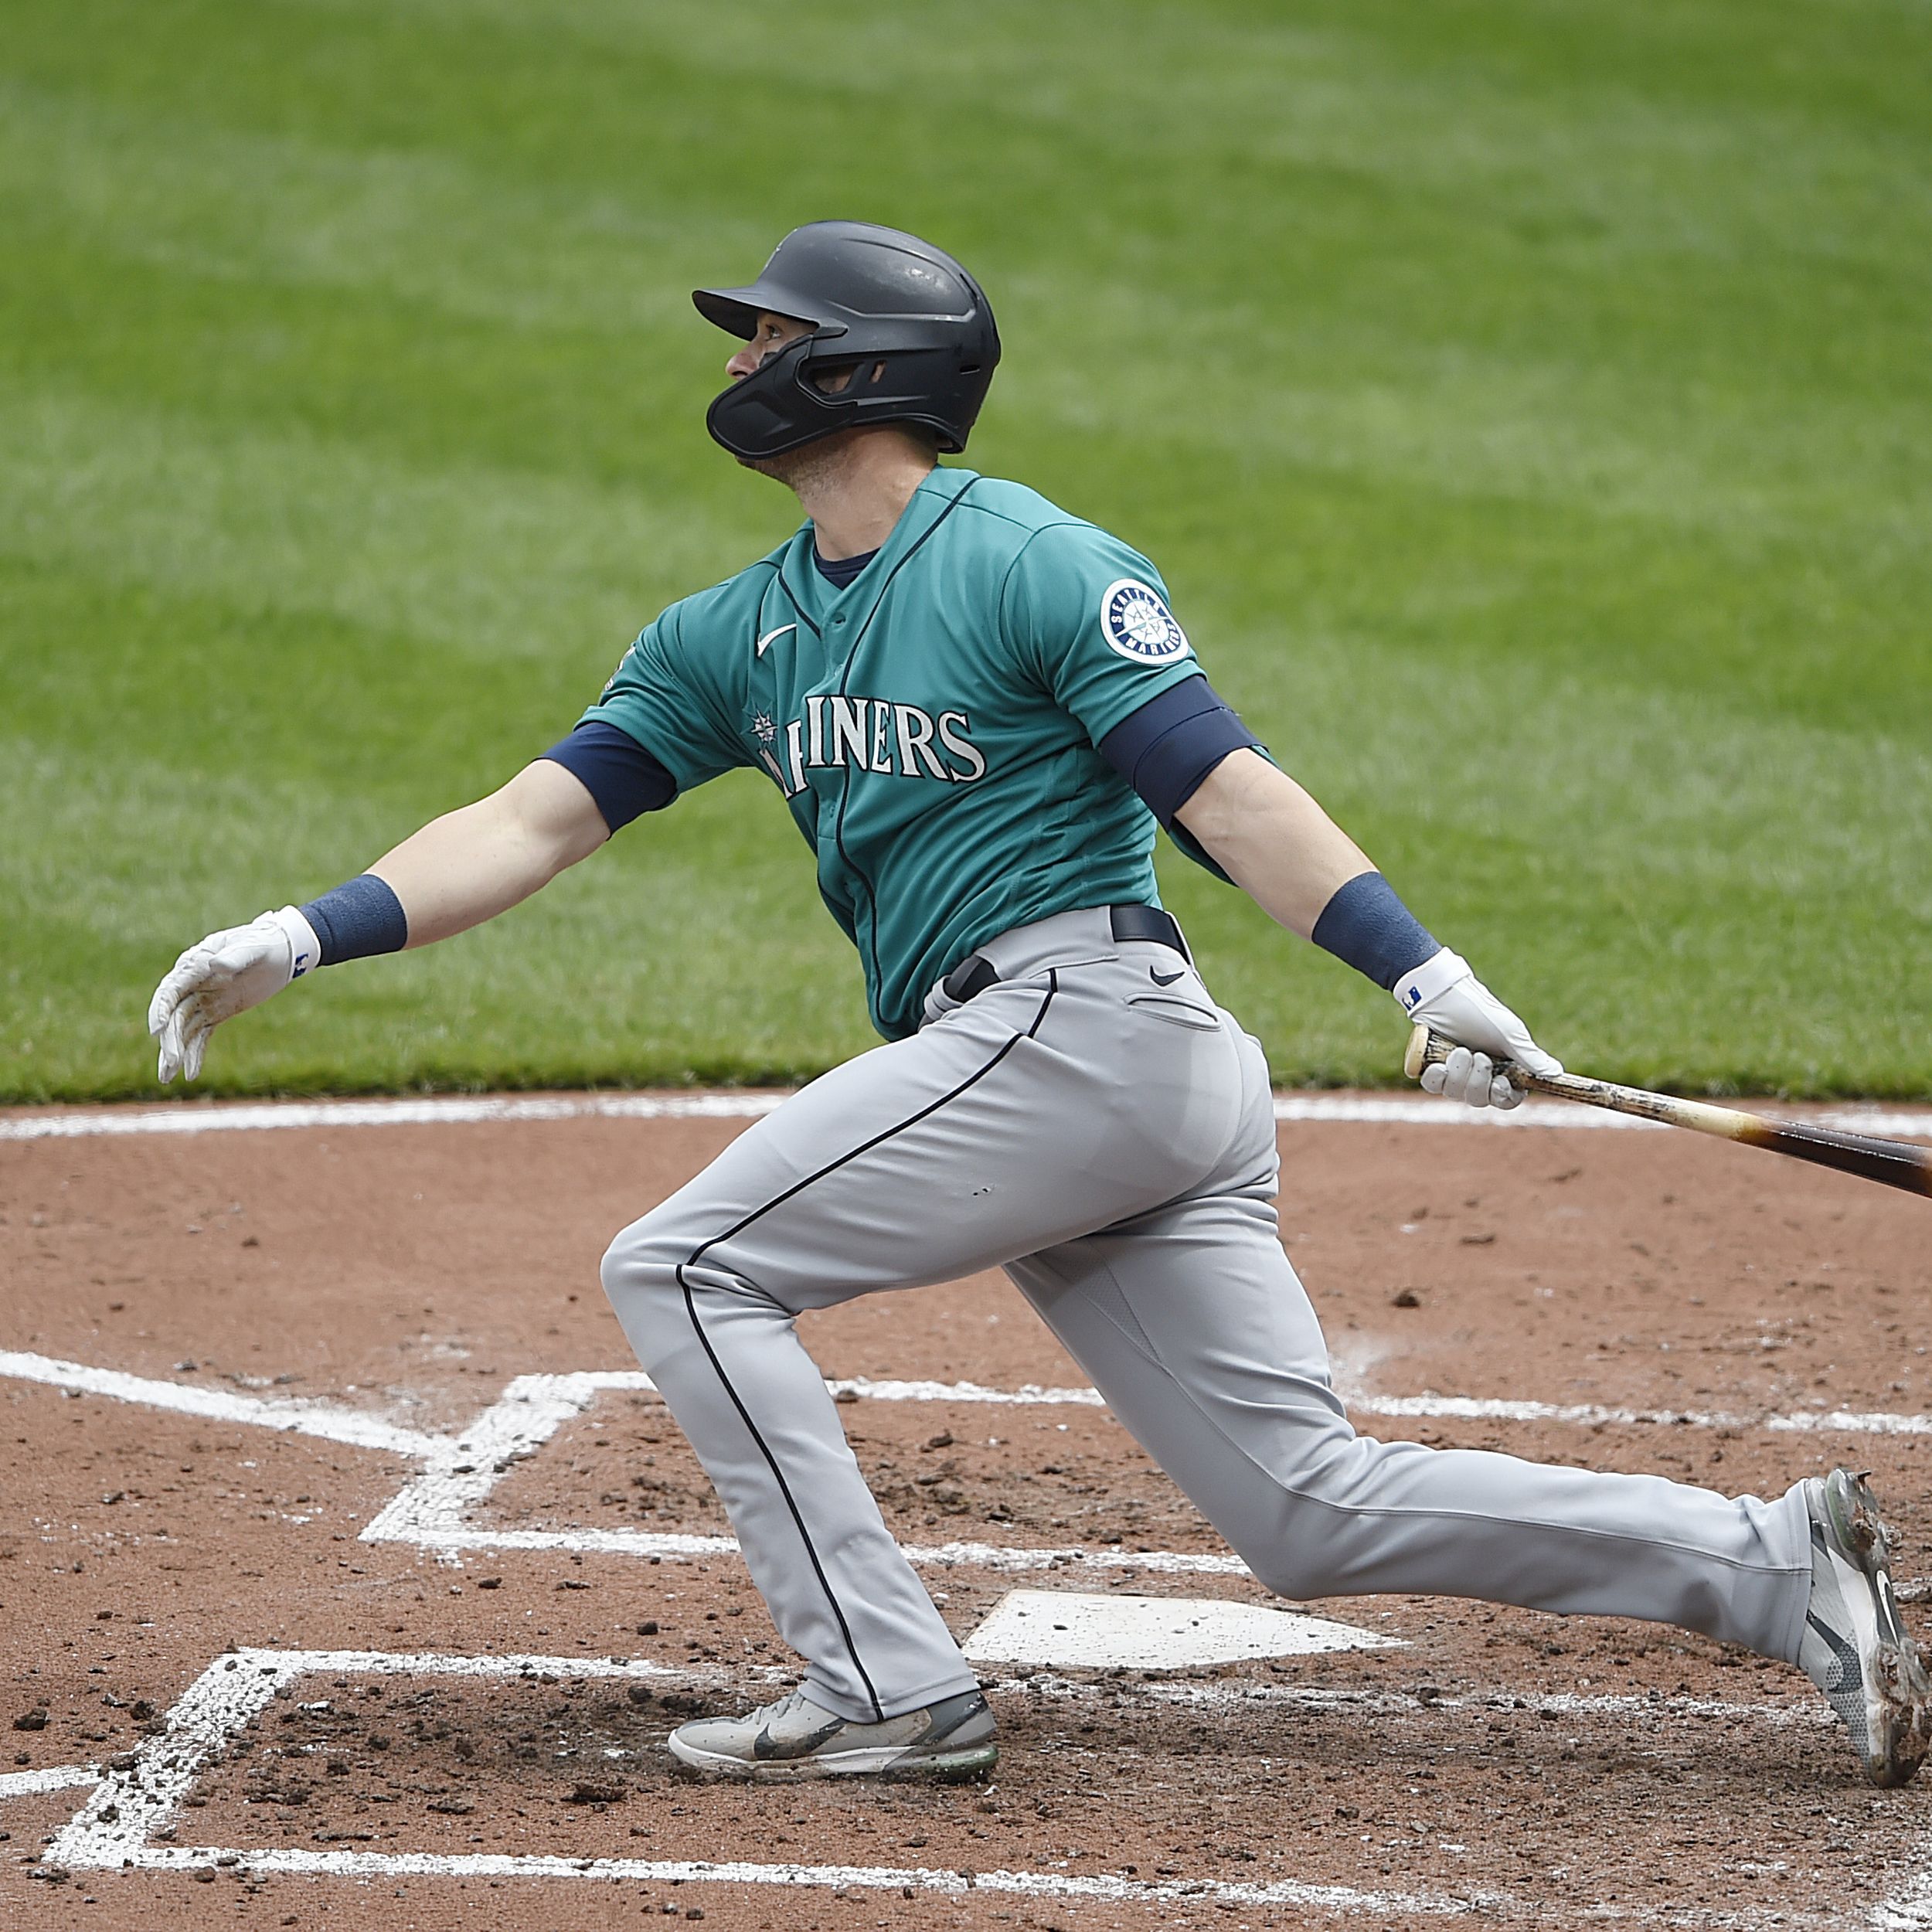 Mitch Haniger has setback, will miss Opening Day - NBC Sports